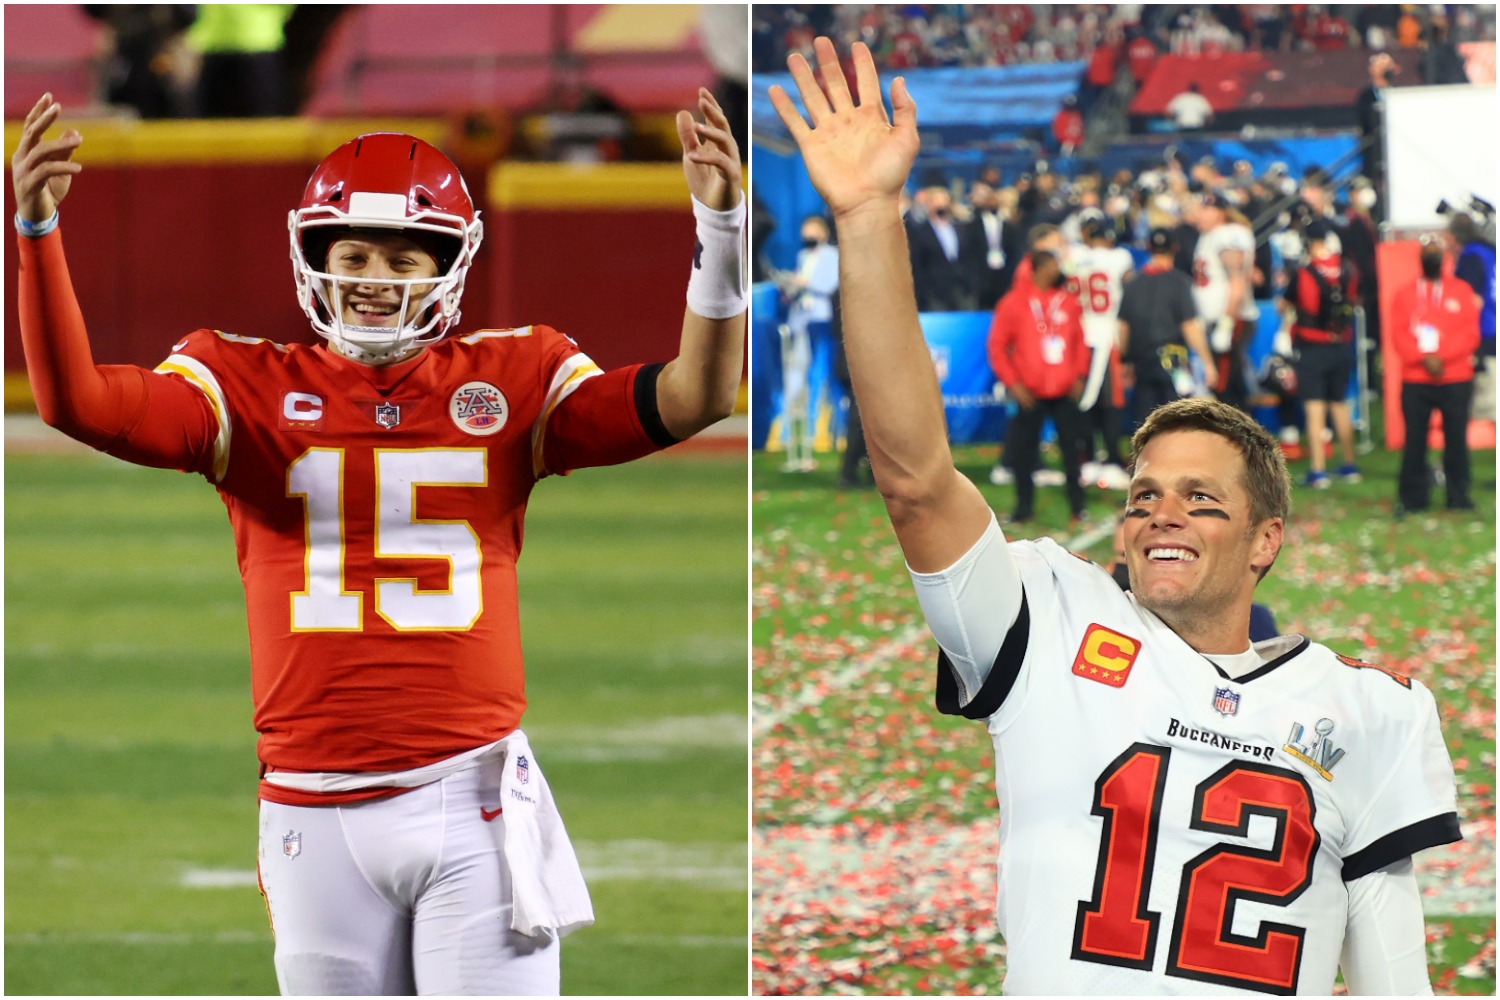 Kansas City Chiefs QB Patrick Mahomes signals to the crowd as Tampa Bay Buccaneers QBTom Brady waves to fans in the stands after winning Super Bowl 55.